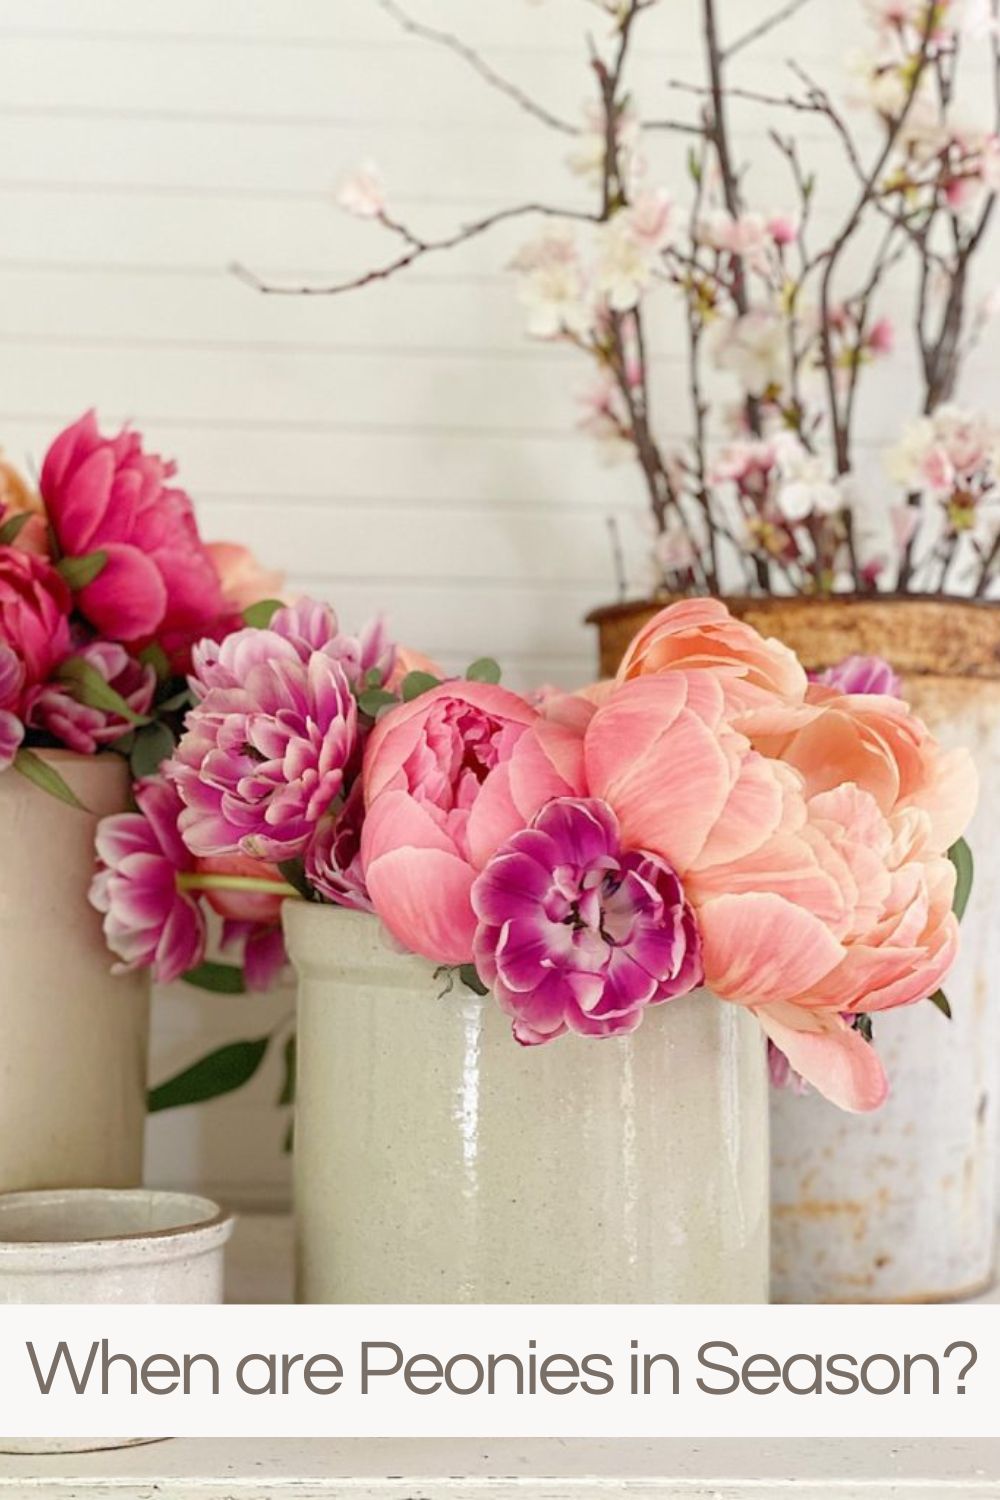 I love pink peonies, white peonies, and every kind of peony. So when are peonies in season so I can make a peonies bouquet for my kitchen? 